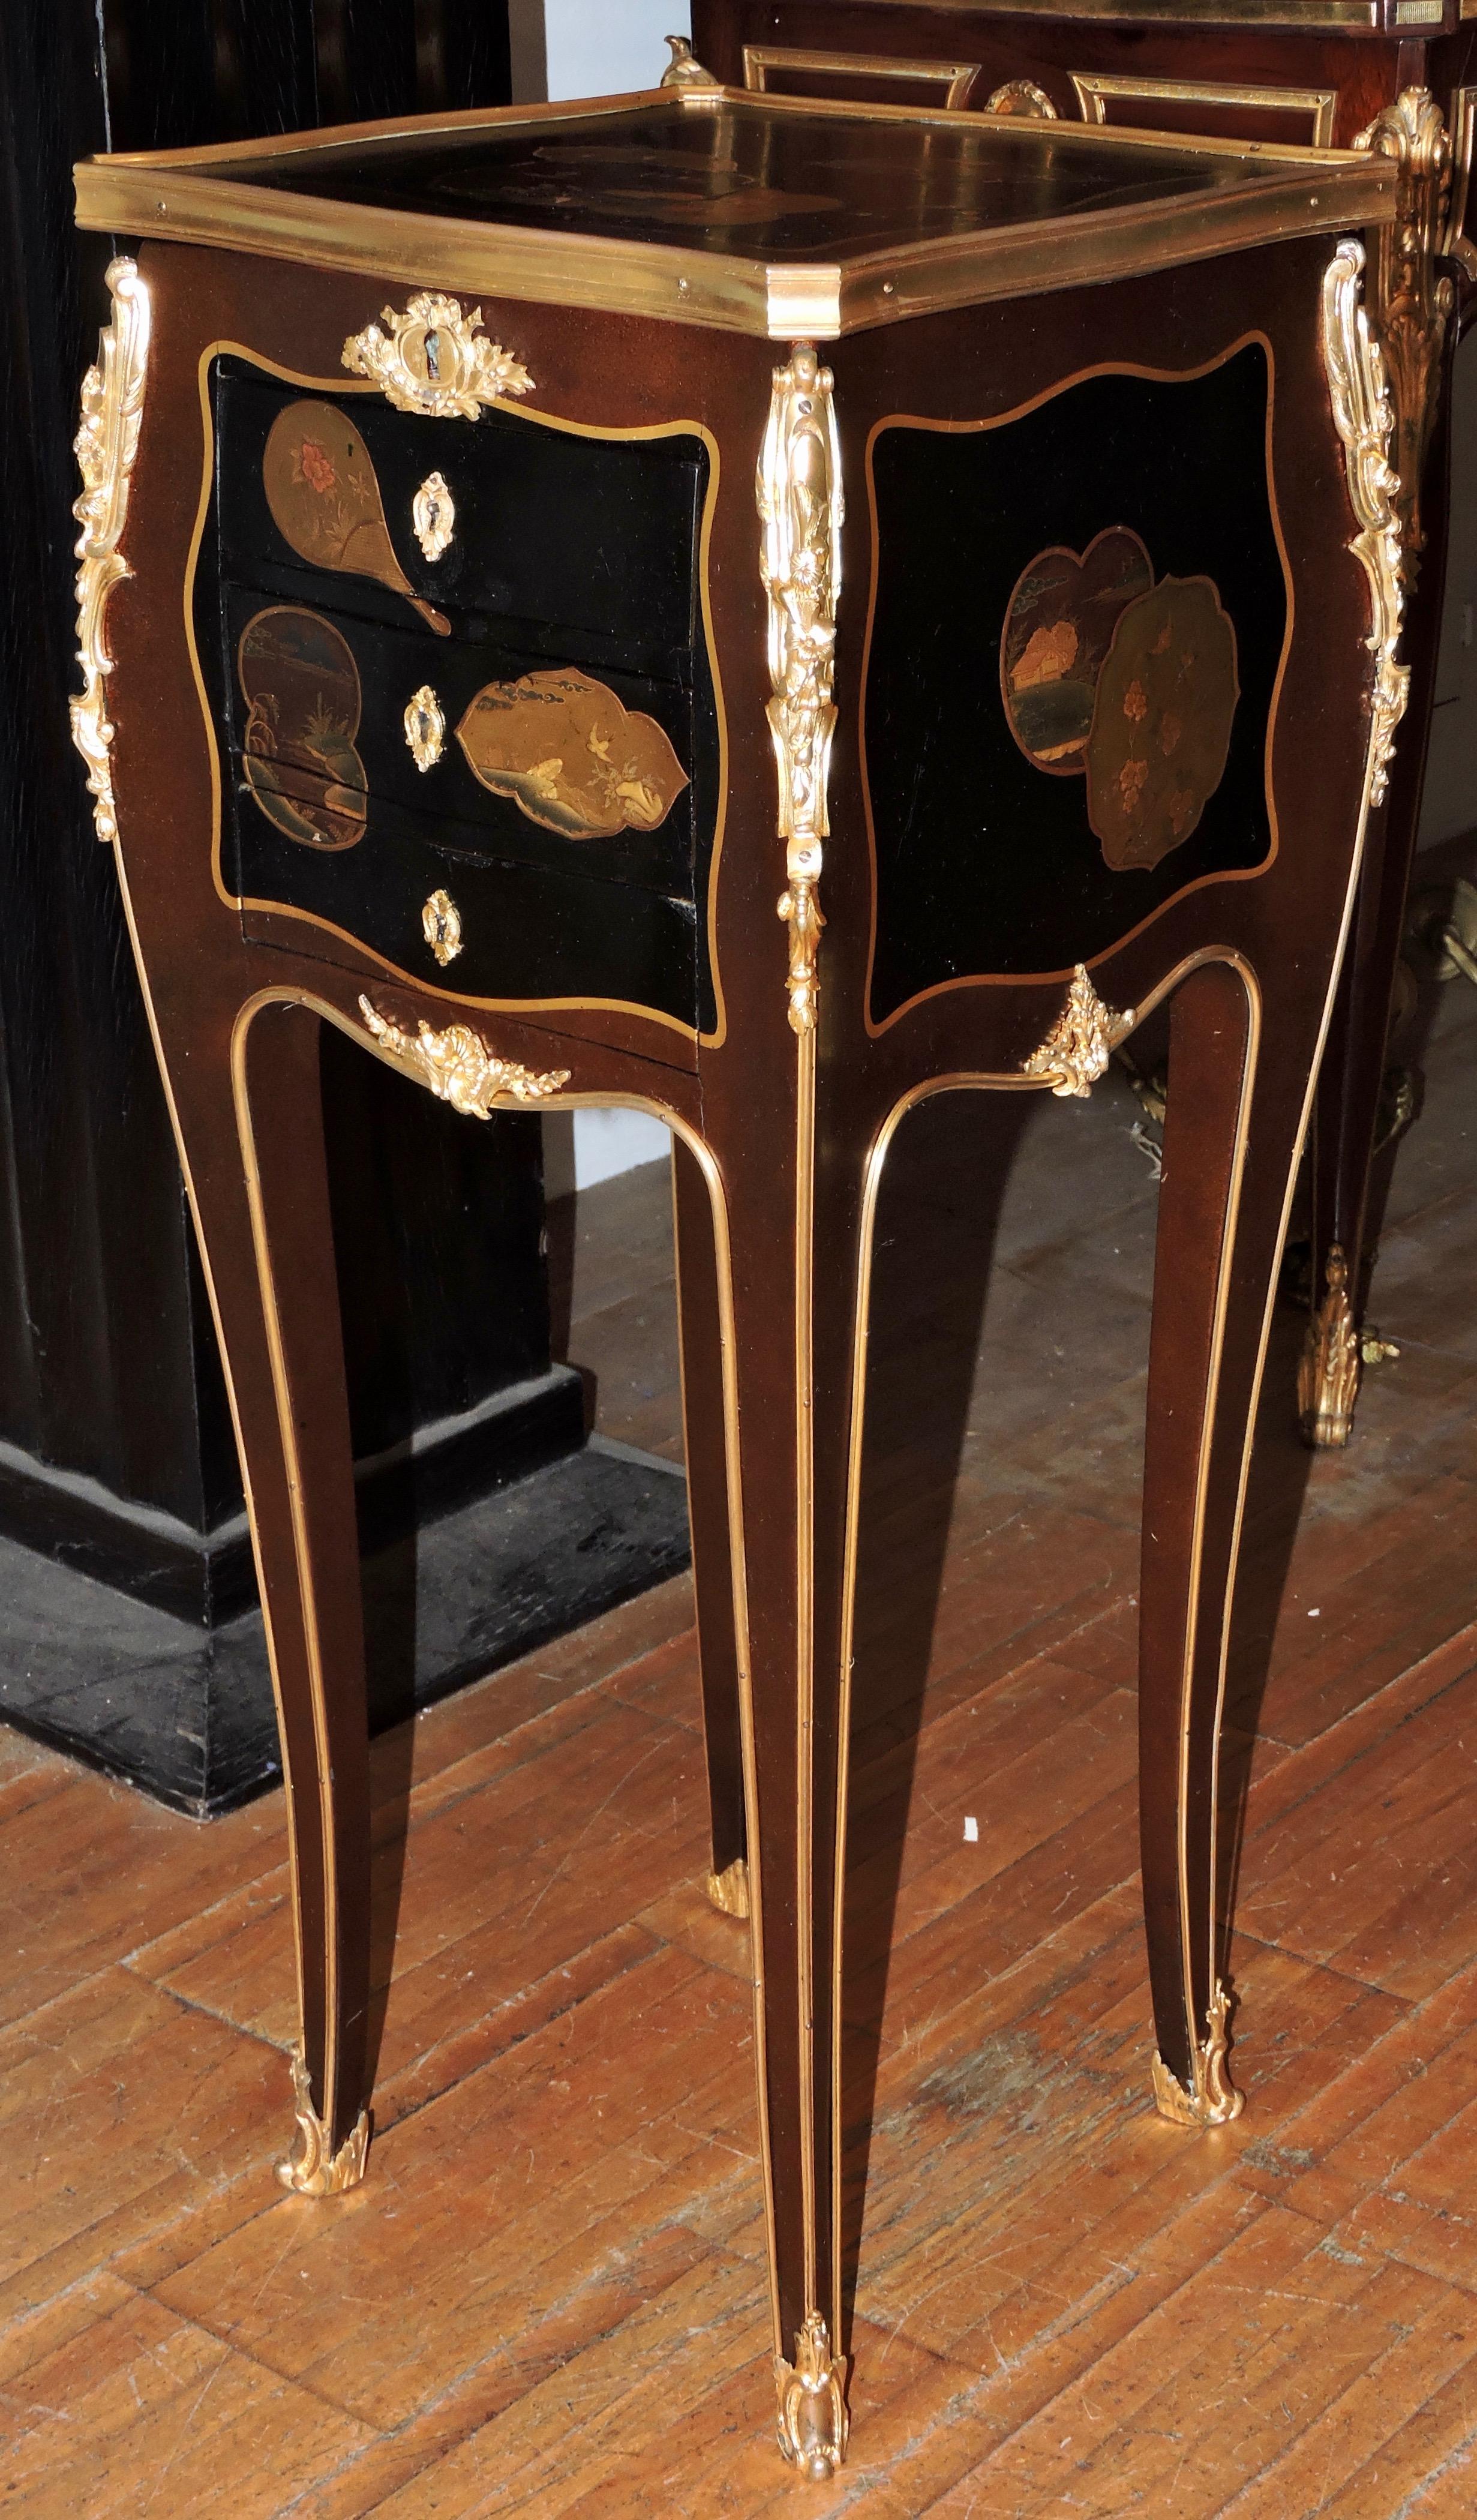 French Louis XV Style Ormolu-Mounted and Lacquered Table à Écrire, circa 1880 (Vergoldet)